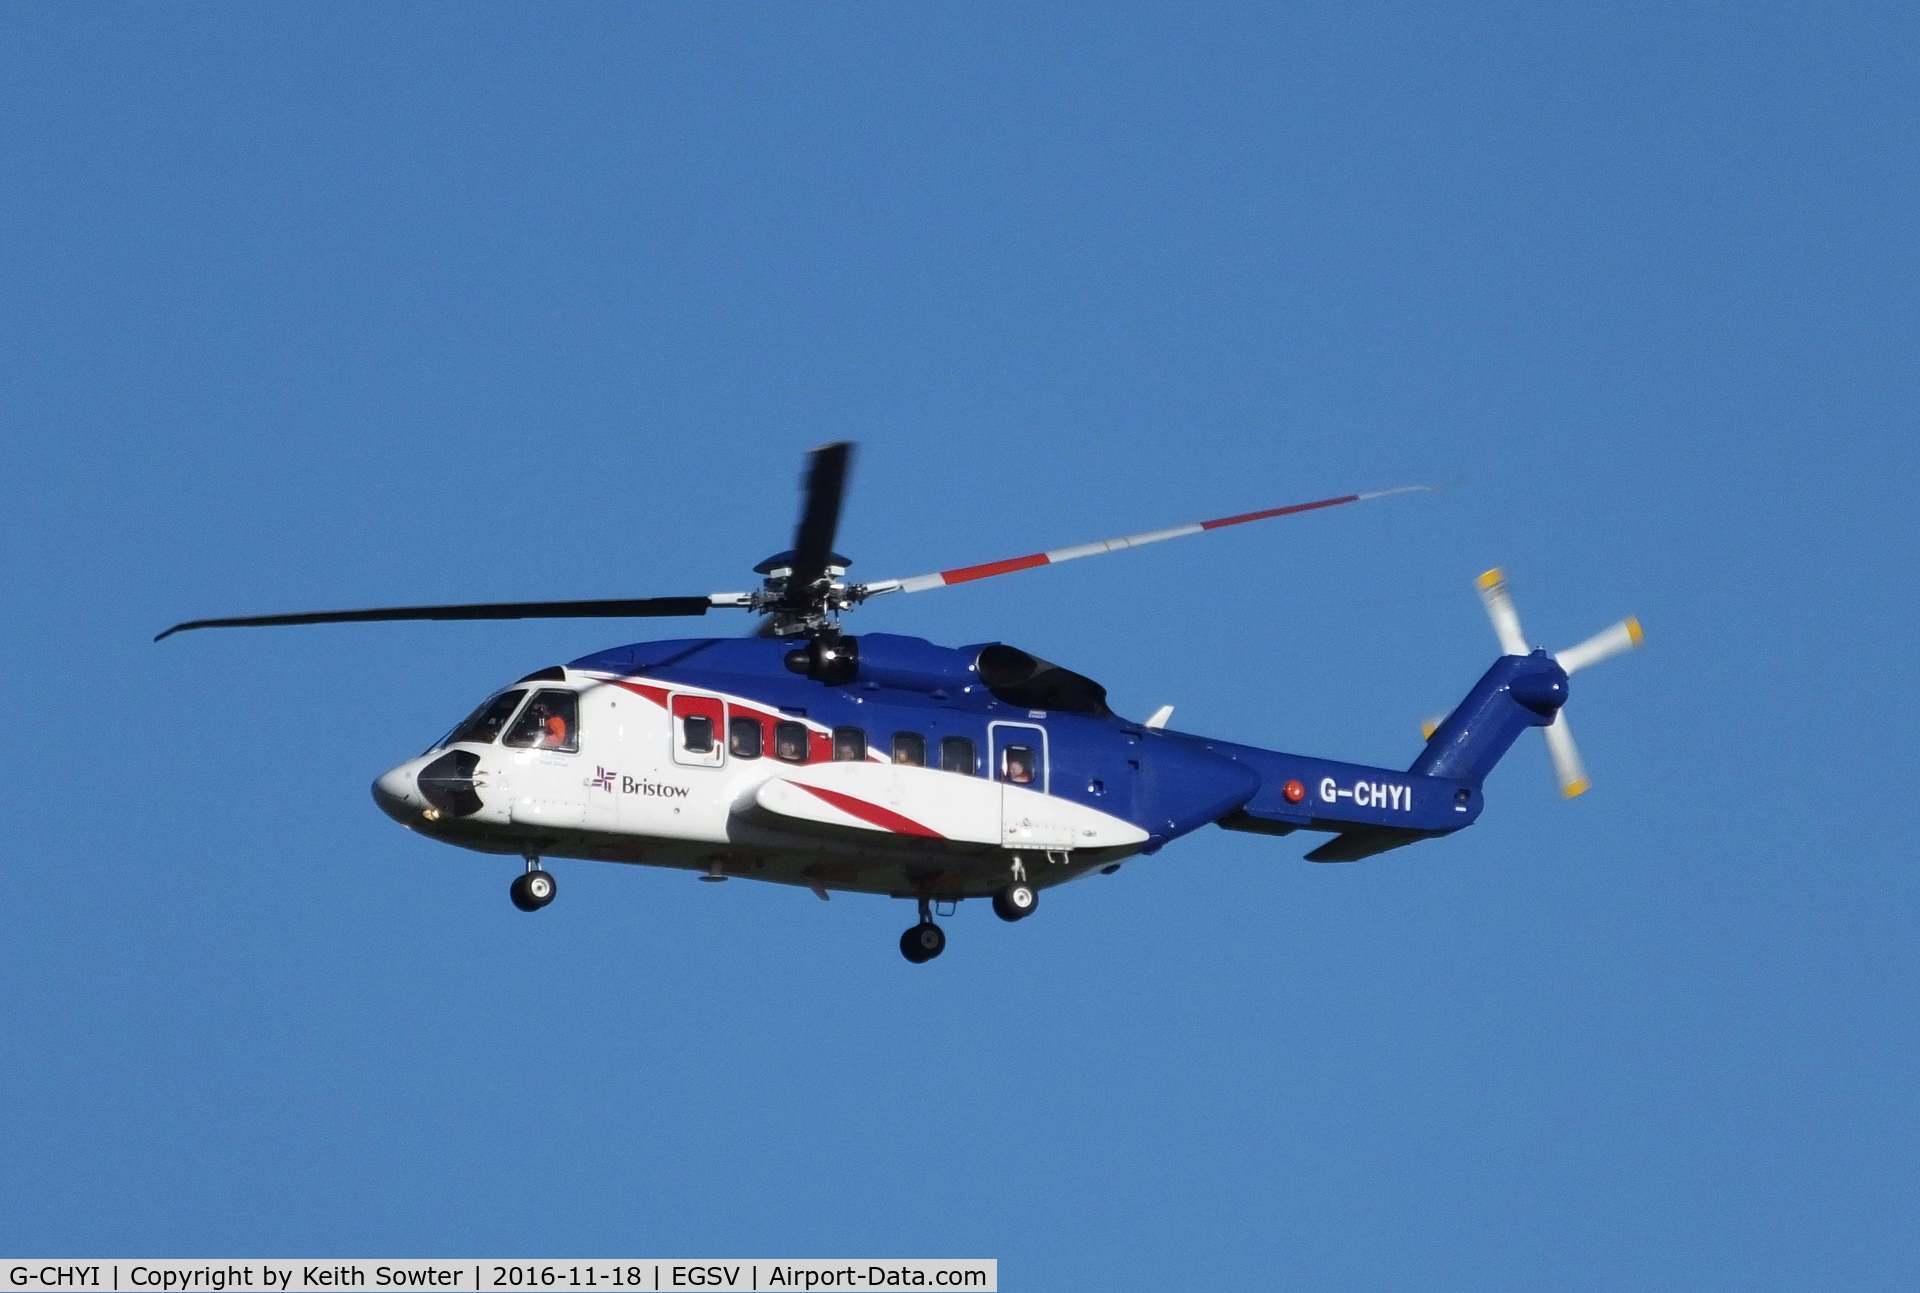 G-CHYI, 2013 Sikorsky S-92A C/N 920197, taking off